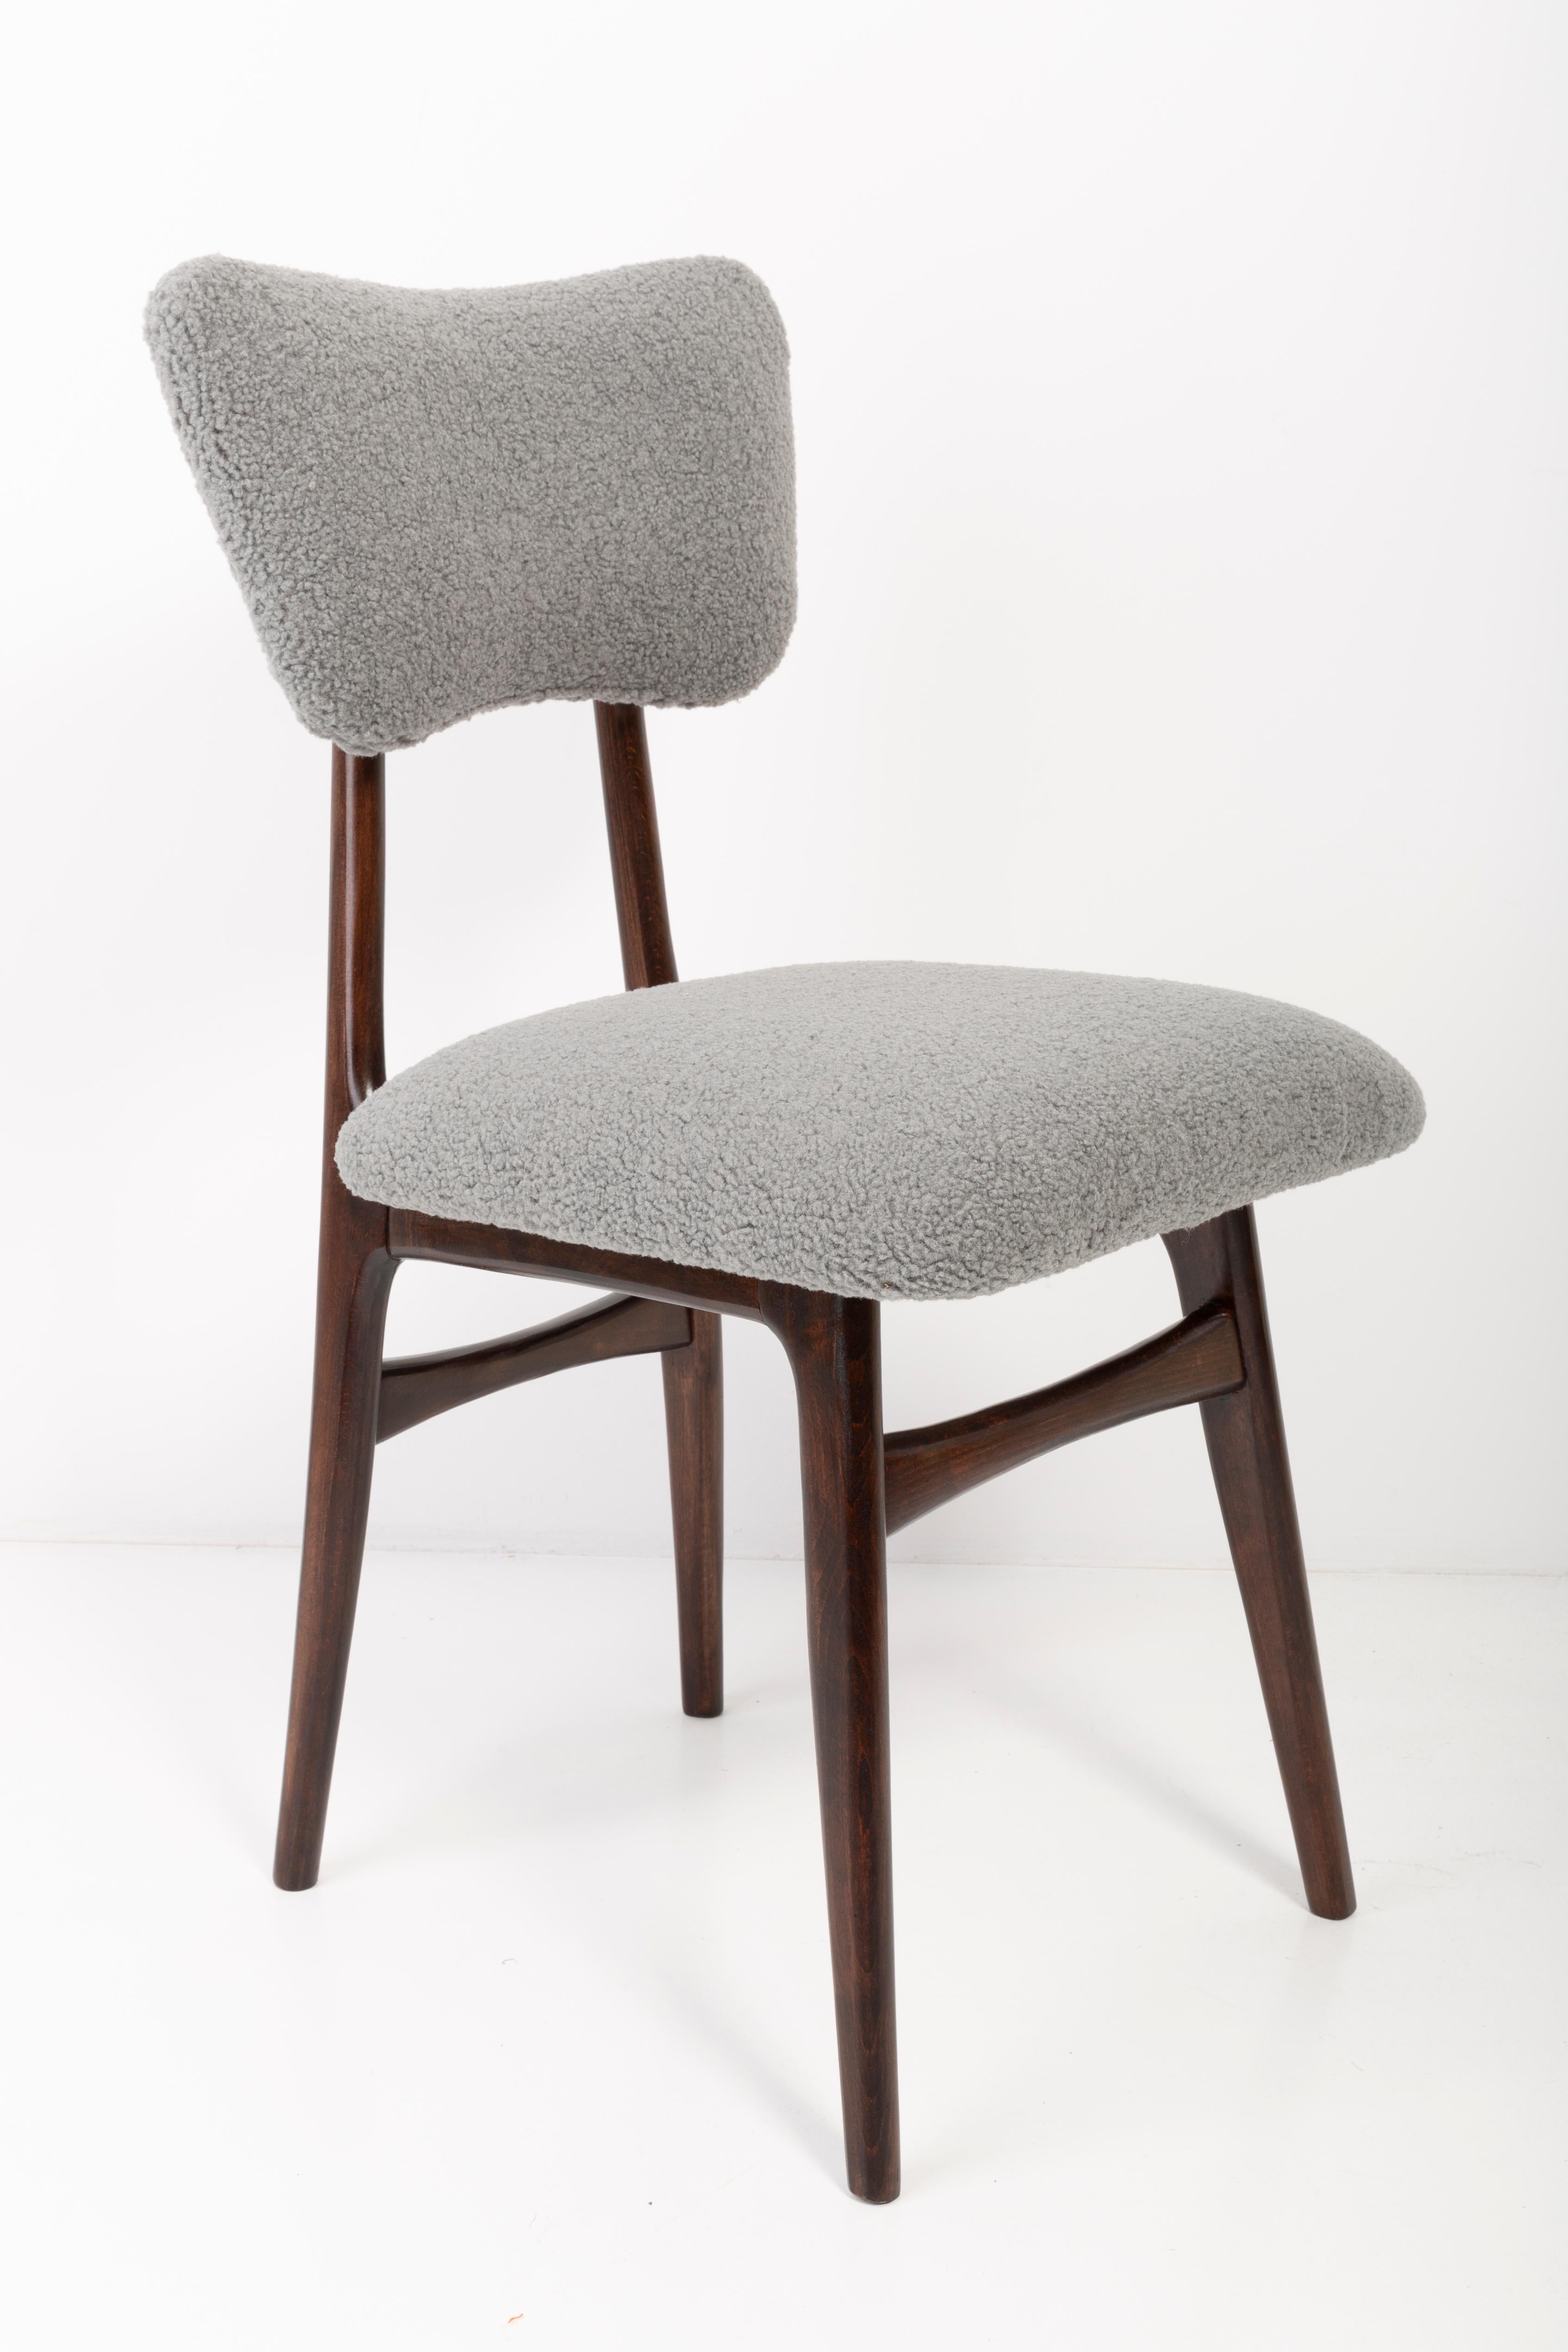 Chairs designed by Prof. Rajmund Halas. Made of beechwood. Chairs are after a complete upholstery renovation; the woodwork has been refreshed. Seat and back is dressed in gray, durable and pleasant to the touch bouclé fabric. Chairs are stabile and